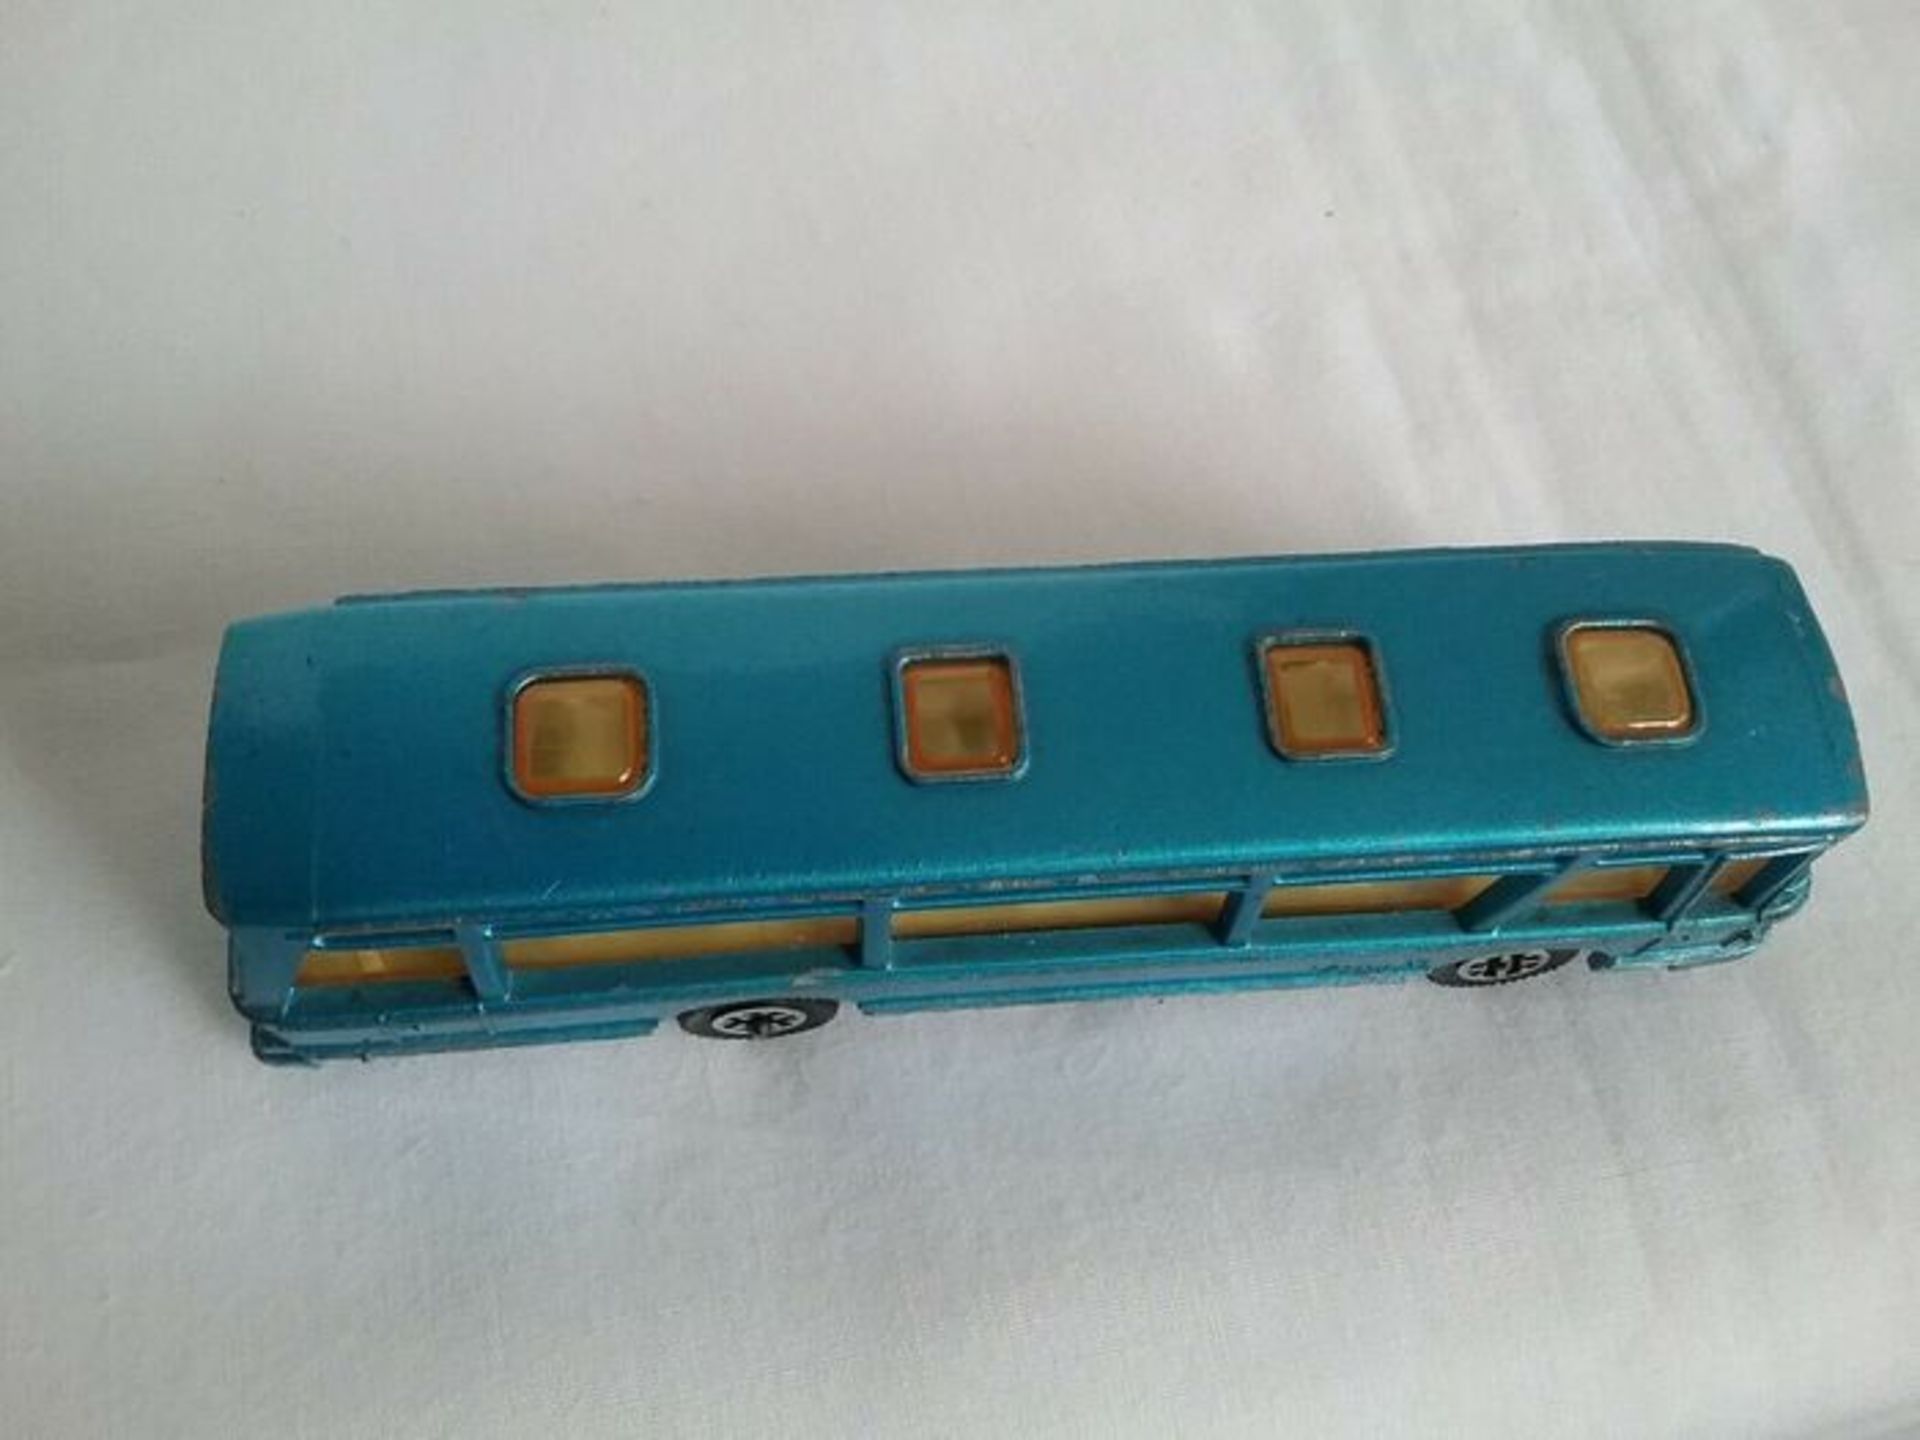 DINKY TOYS VICEROY COACH MADE IN ENGLAND - Image 4 of 4